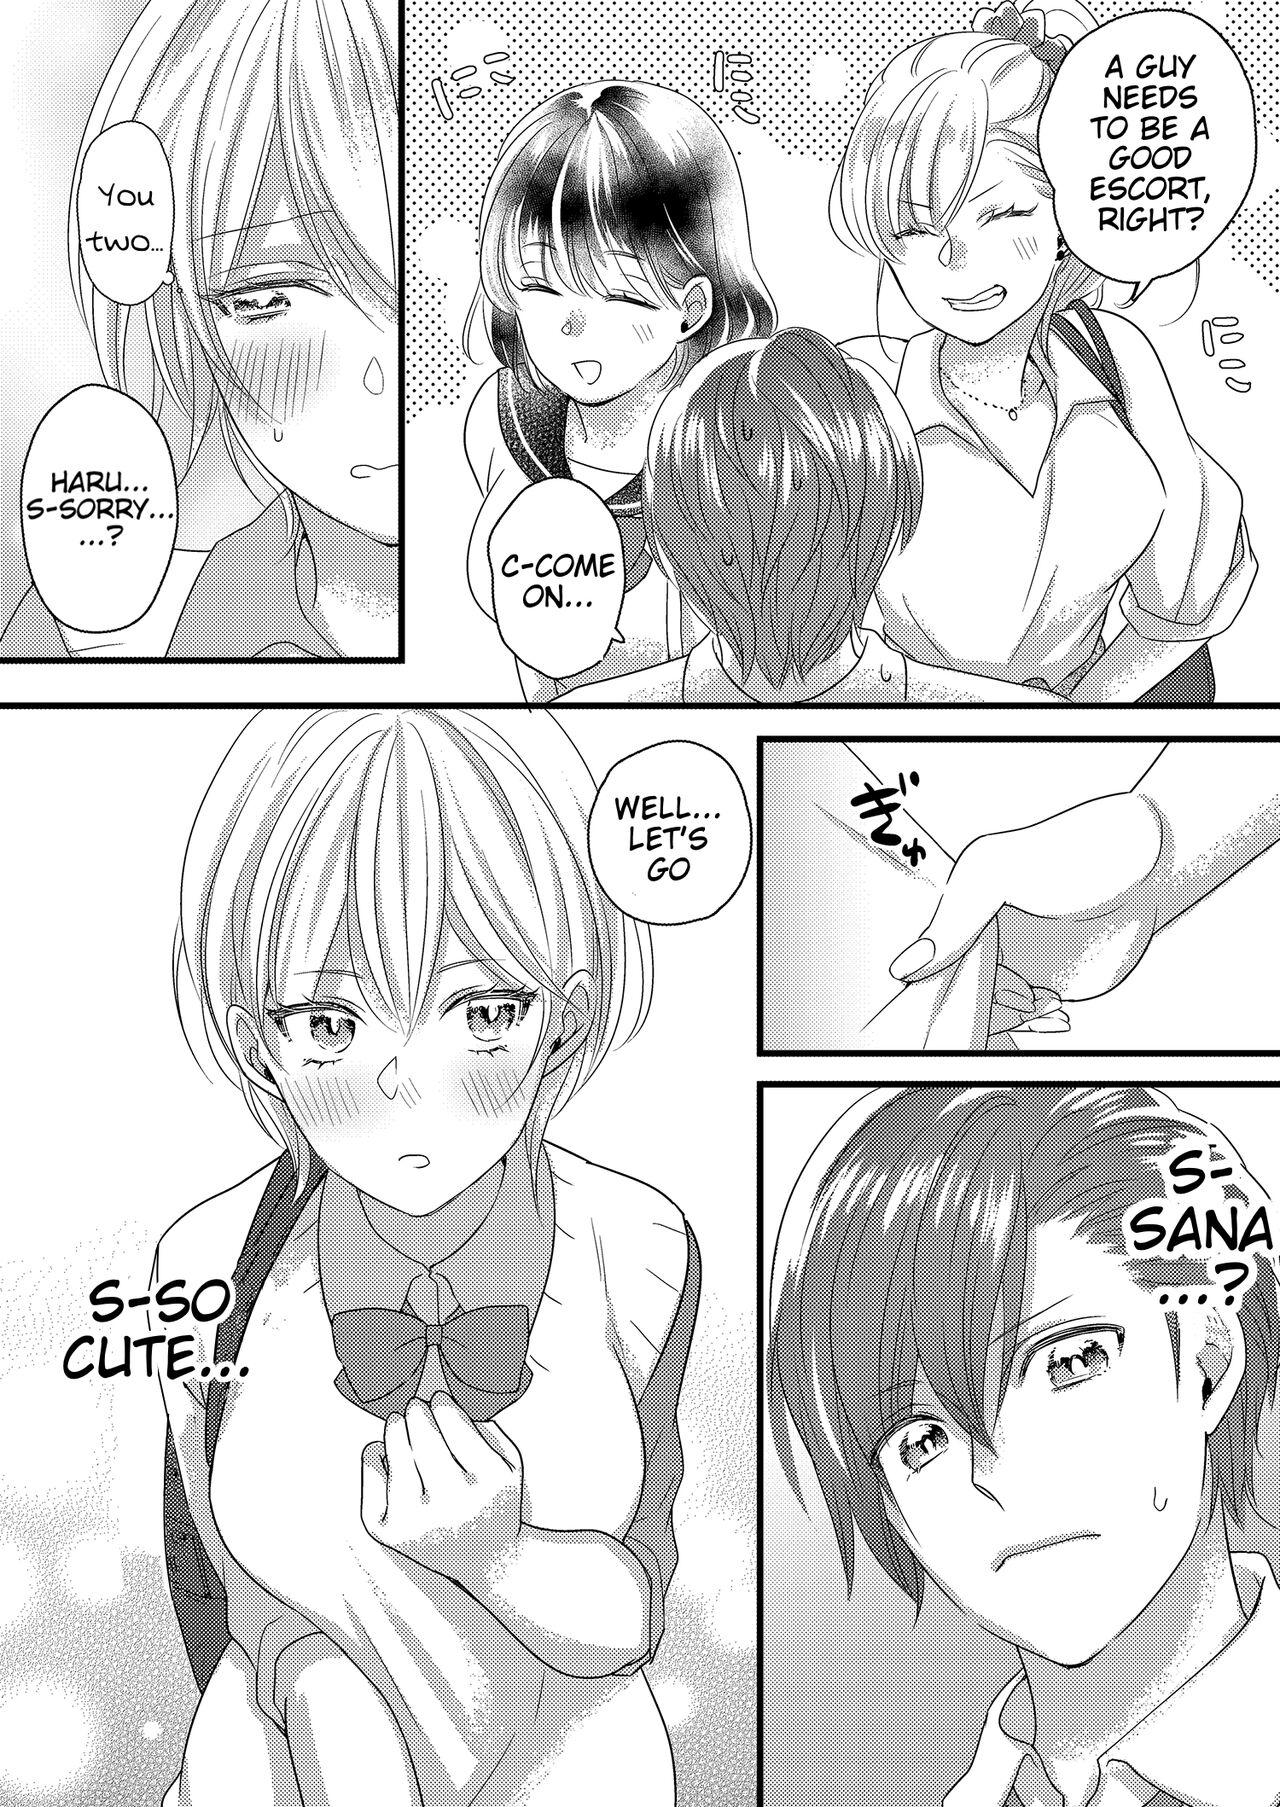 Wet Pussy Haru and Sana ～Love Connected Through Cosplay～ - Original Parody - Page 2